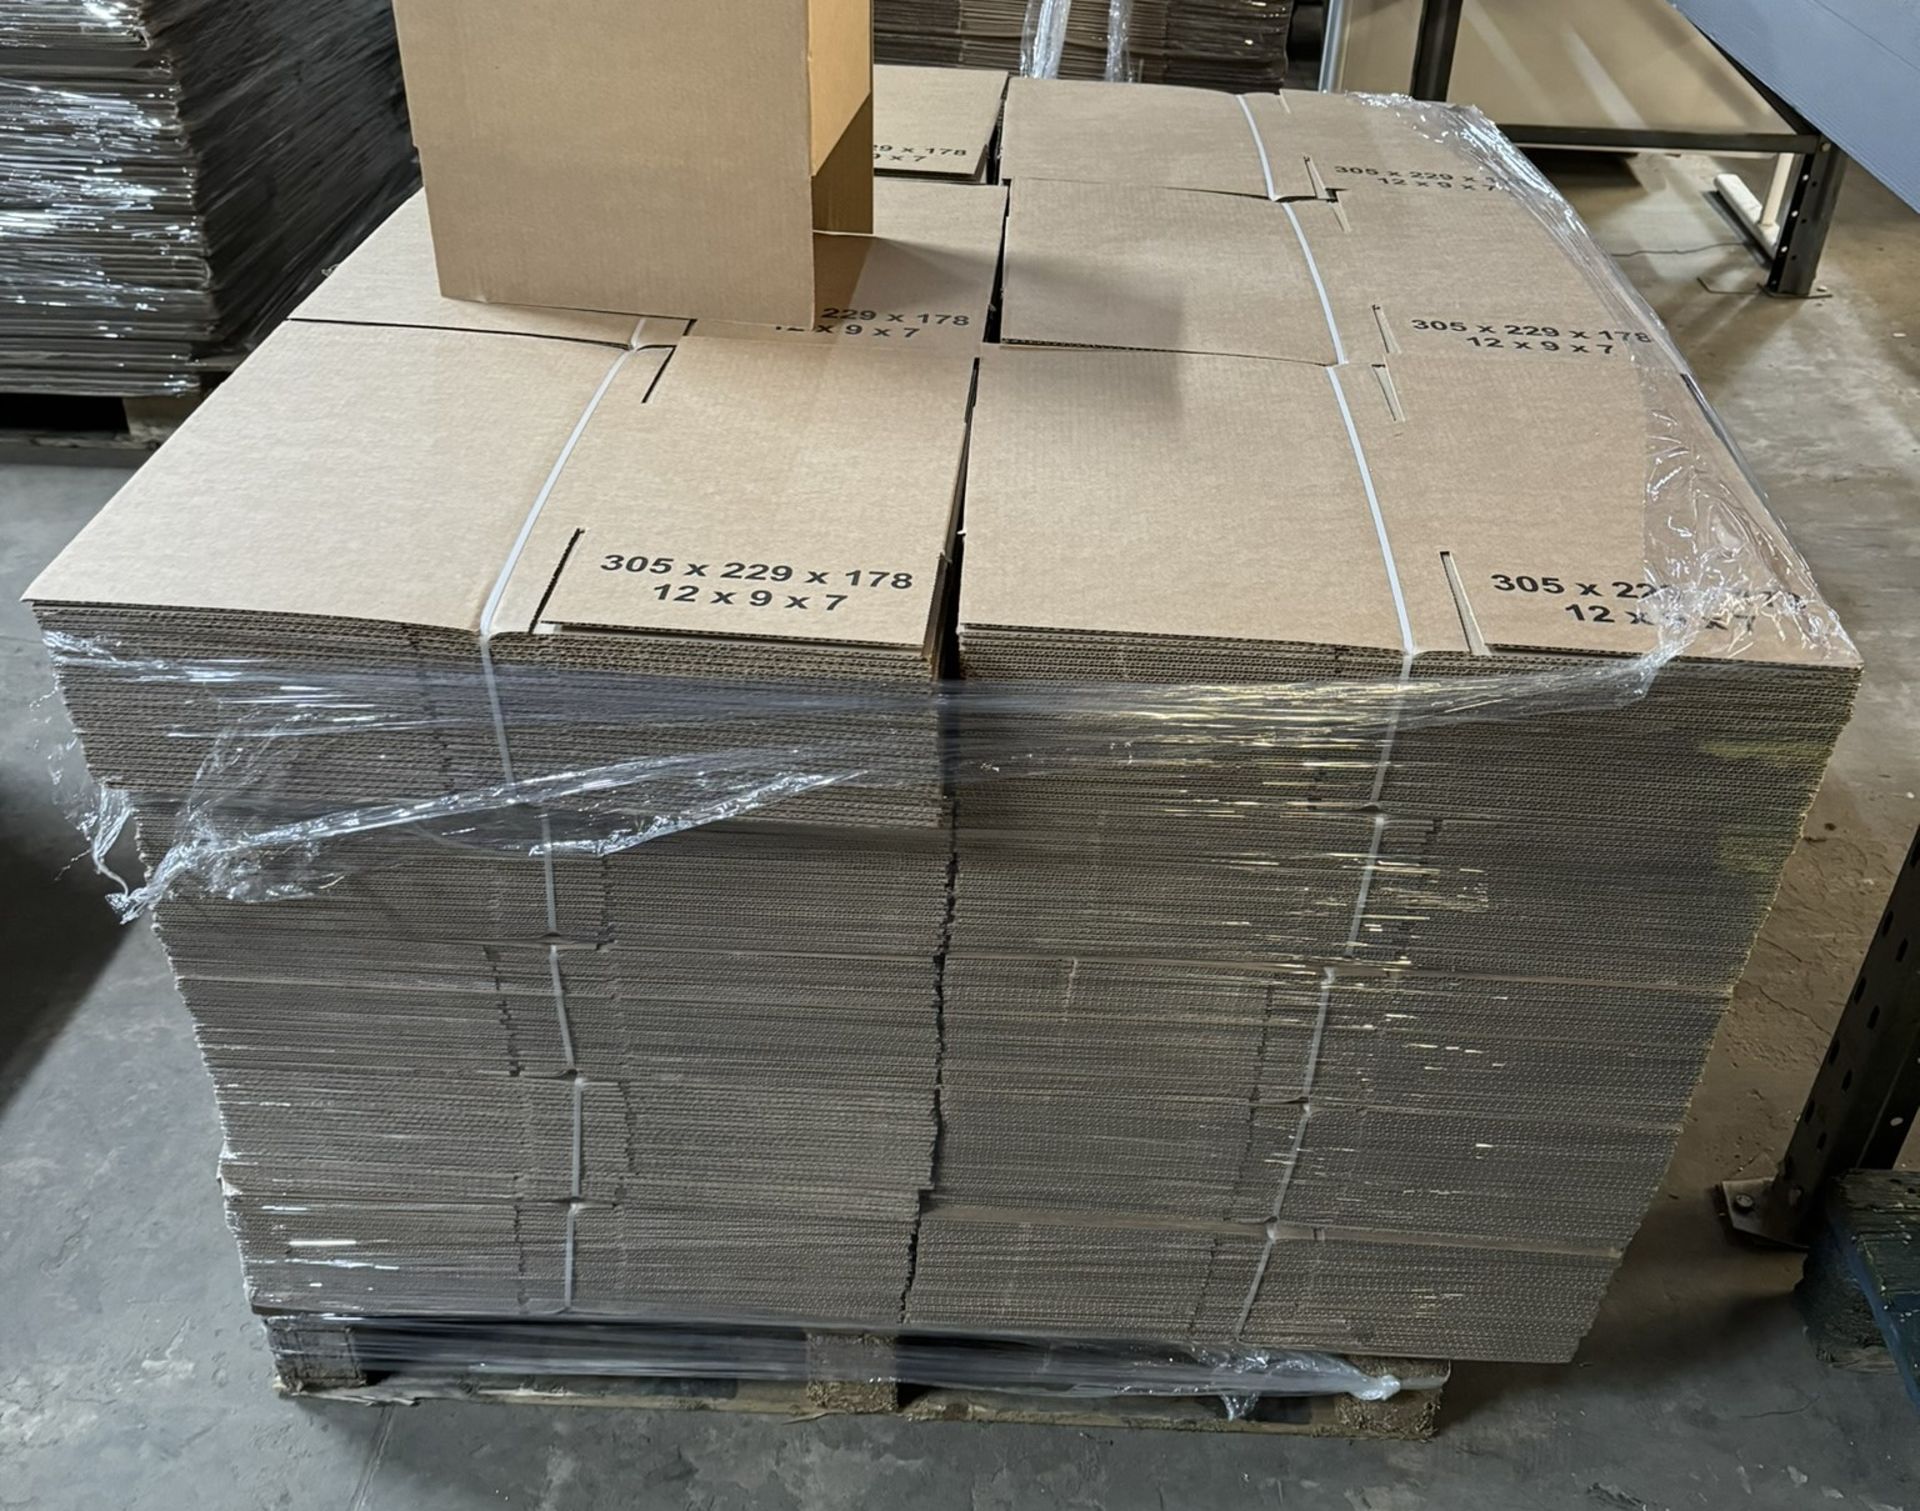 750 x UK Packaging Supplies Single Wall Cardboard Boxes | 305 x 229 x 178MM - Image 5 of 6